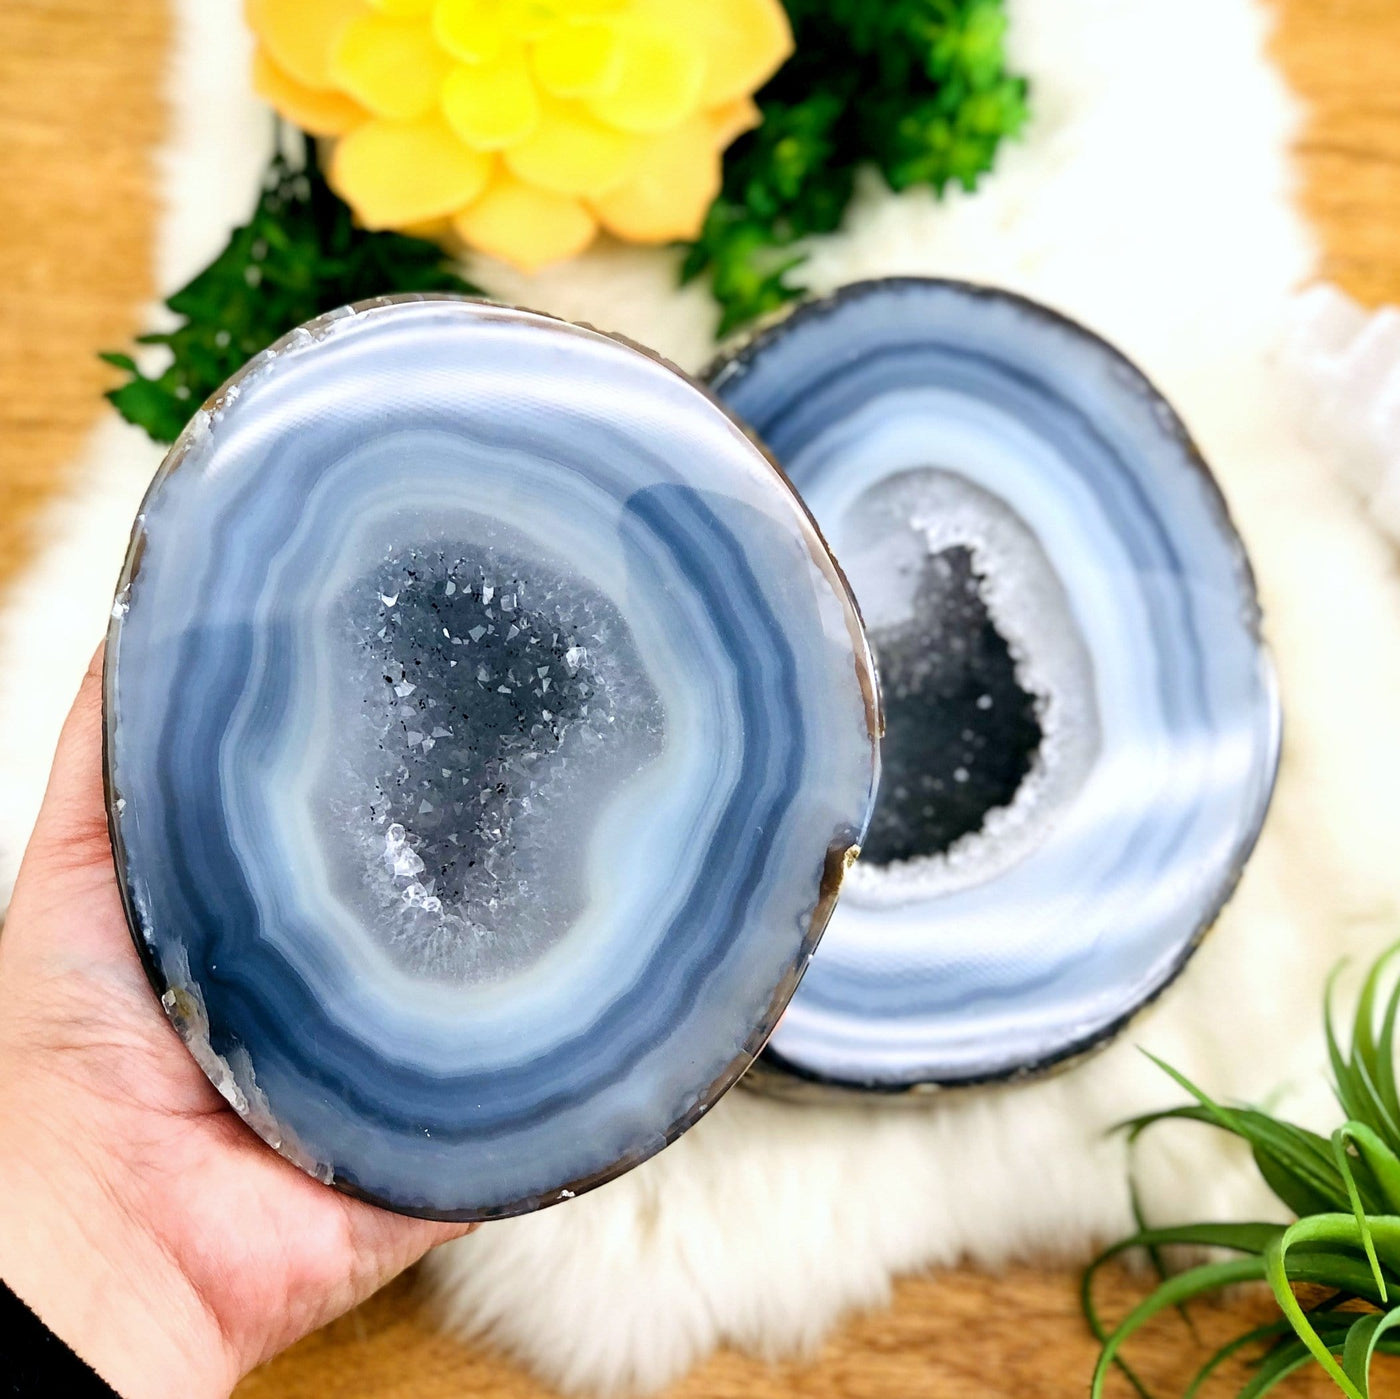 Large agate geode box open displaying the pattern and druzy, one half of the geode is in a hand. Plants in the background.